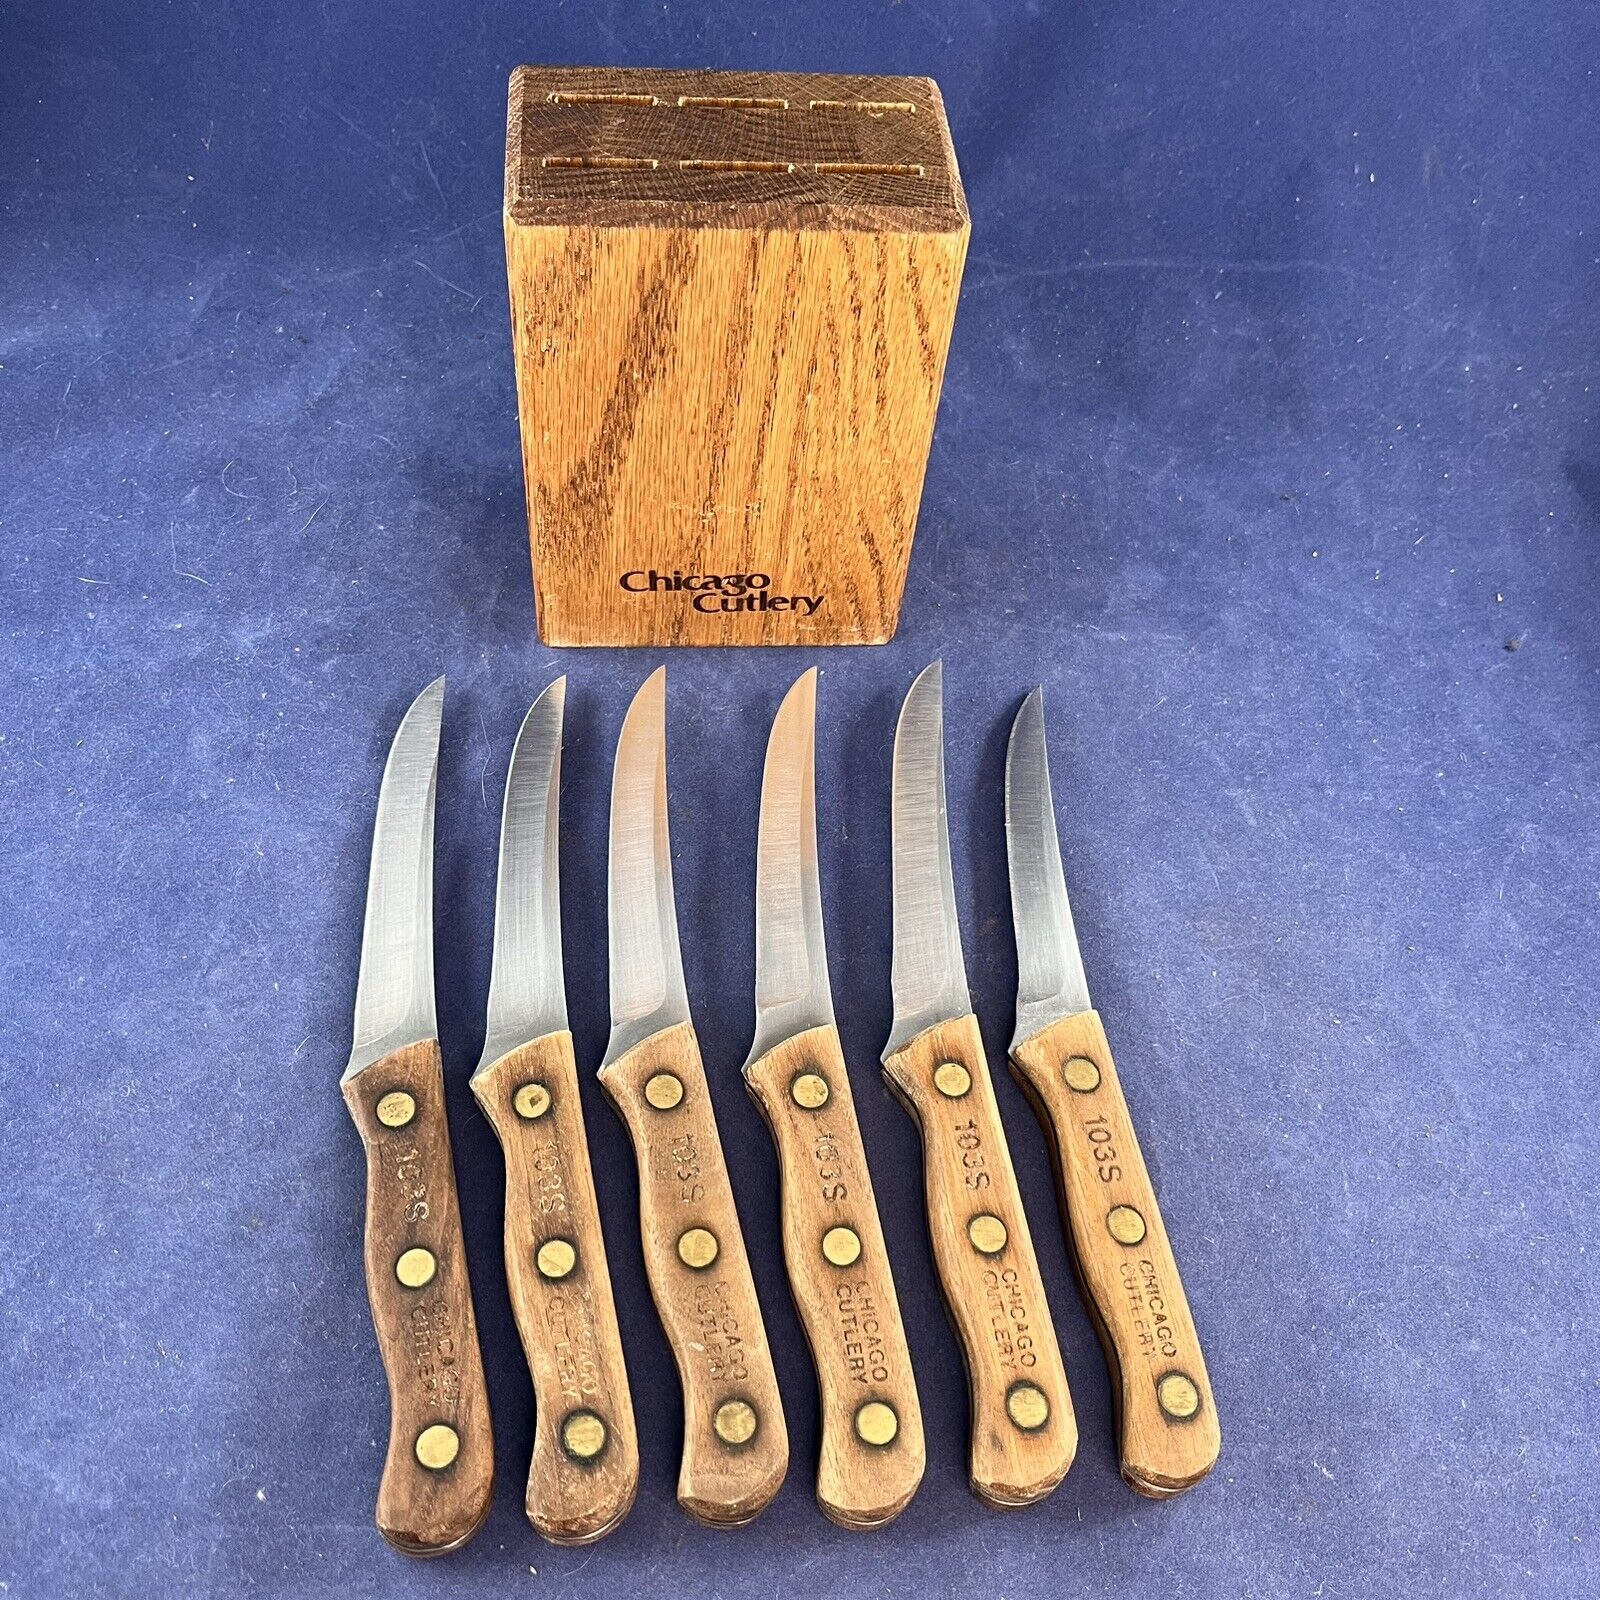 Vintage Chicago Cutlery Walnut Handle 103S Steak Knives with Block USA set of 6 